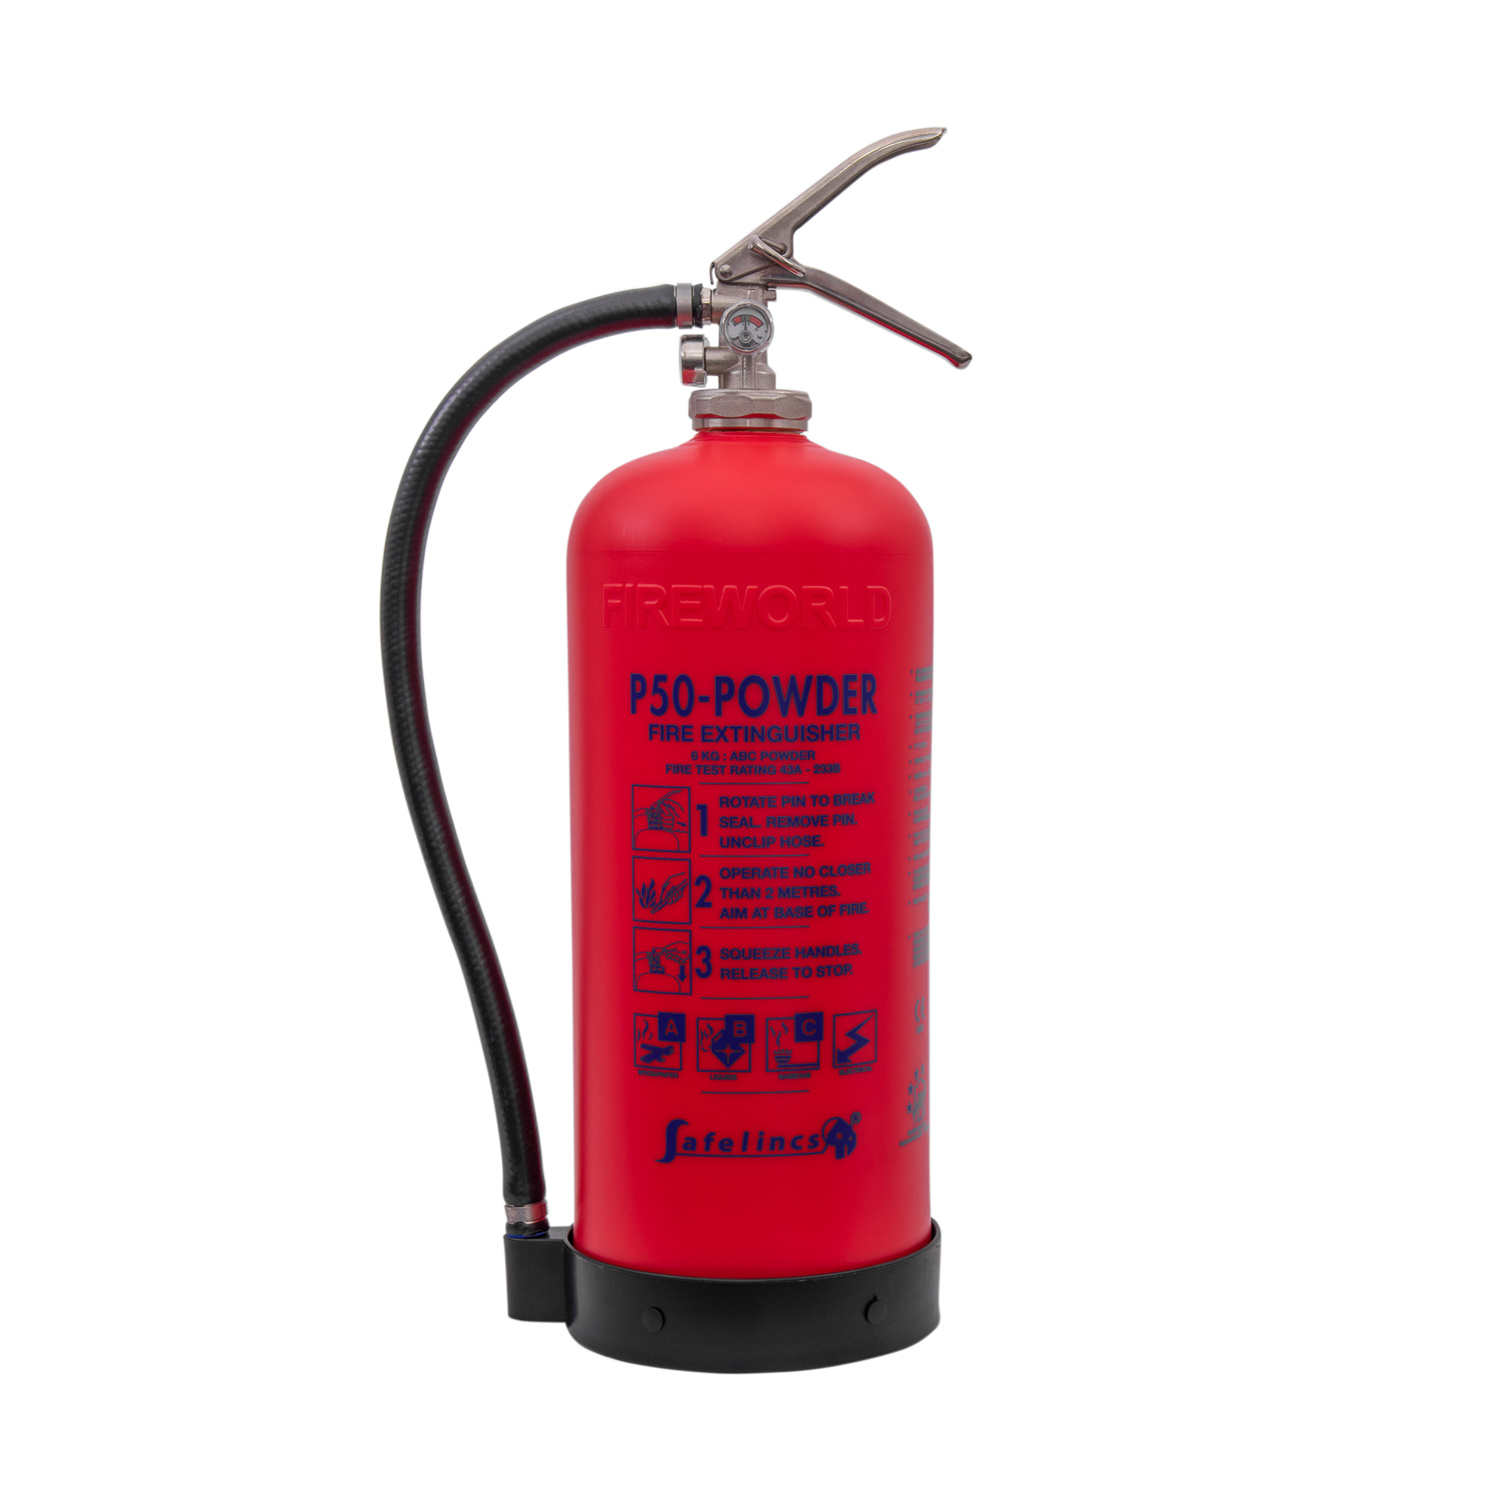 Image of the P50 6kg Powder Fire Extinguisher